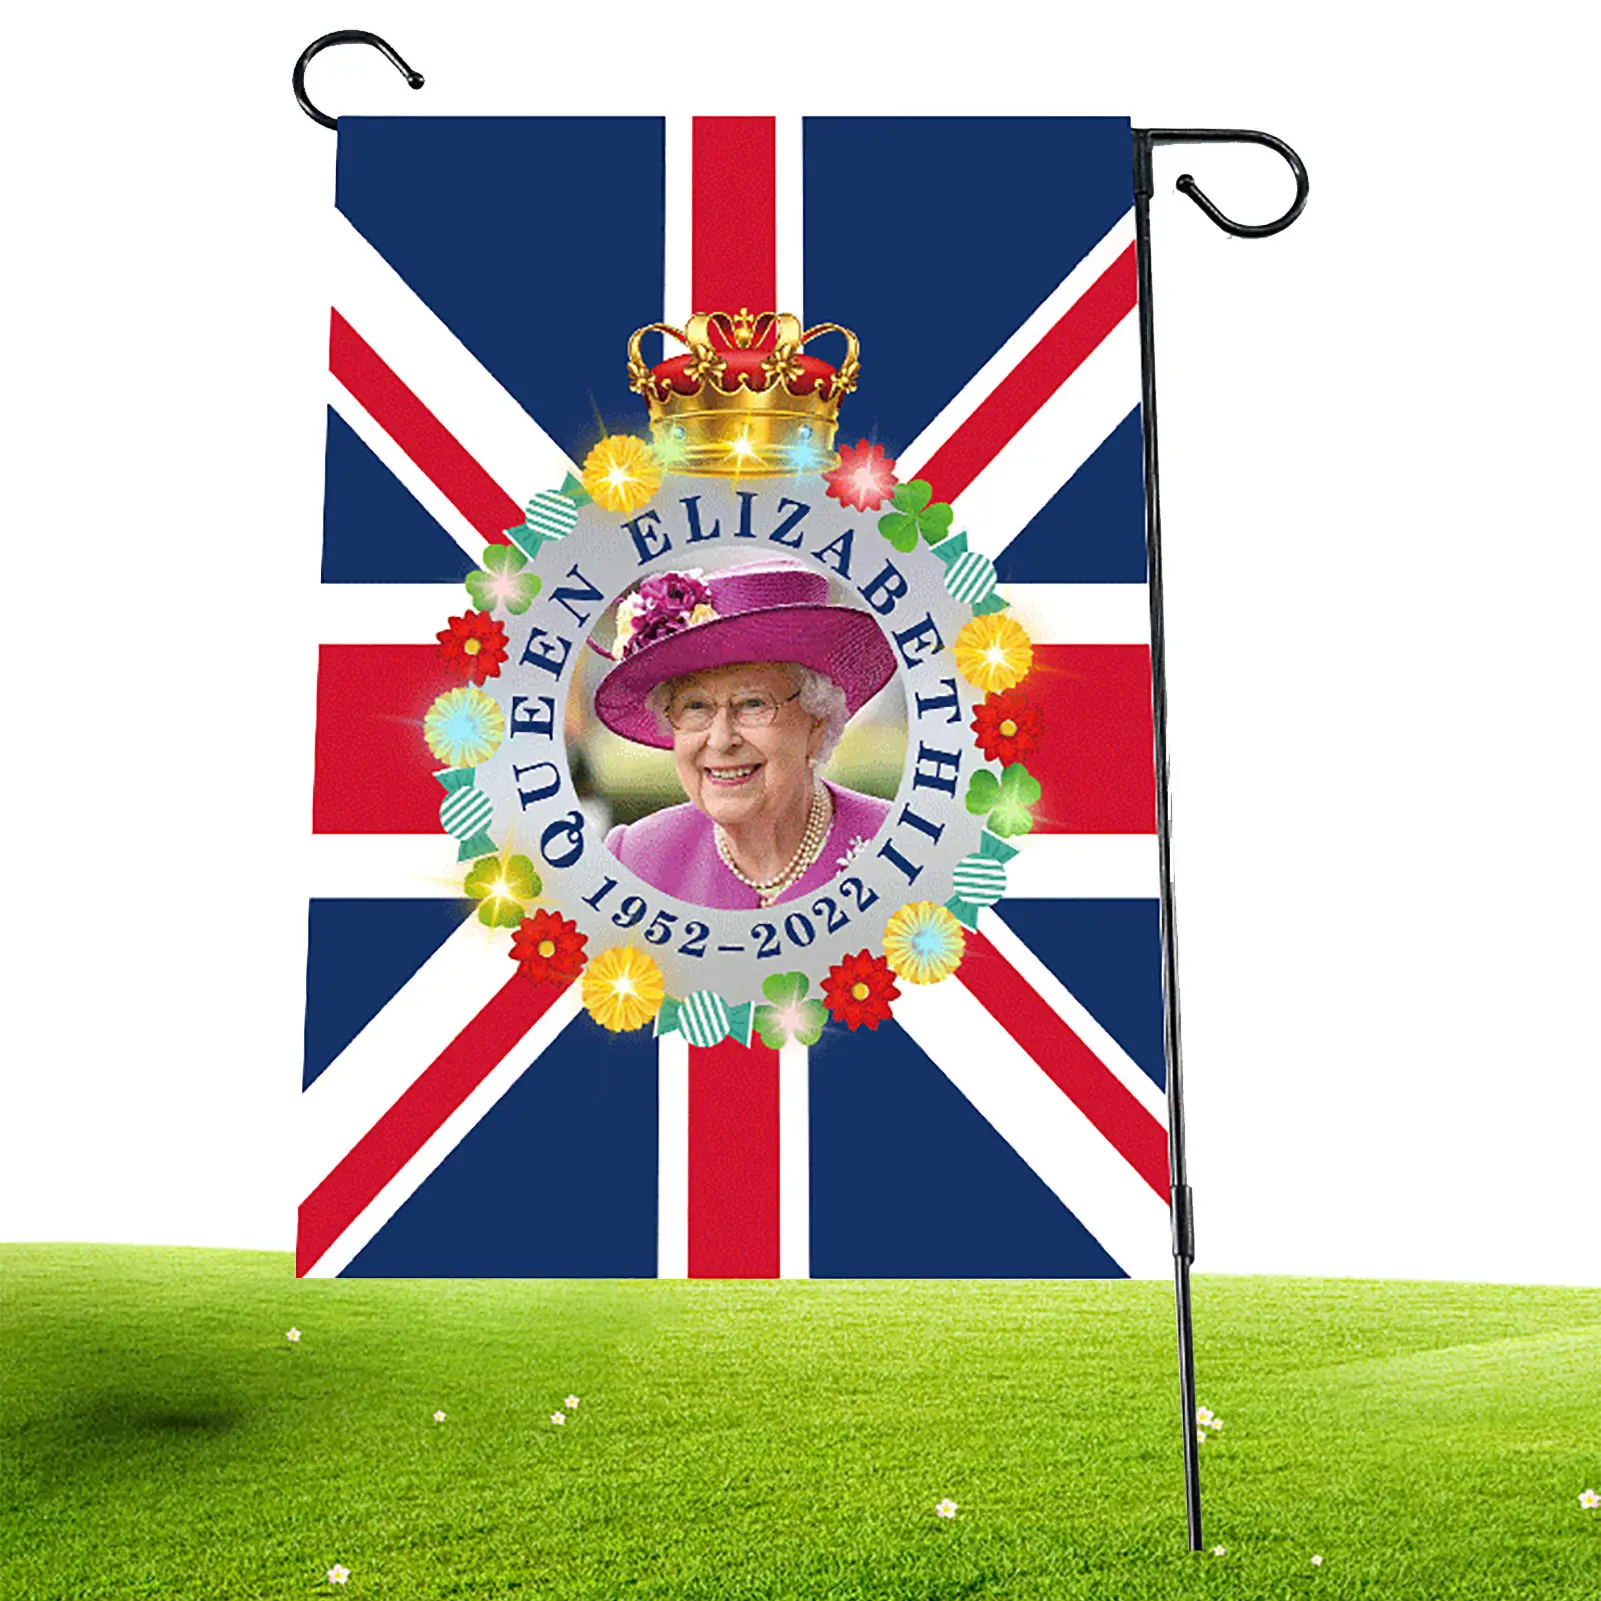 

Bunting For Queens Plati-num Jubilee Union Jack Flag Featuring Her Majesty The Queen 70th Anniversary Decoration For Garden Yard